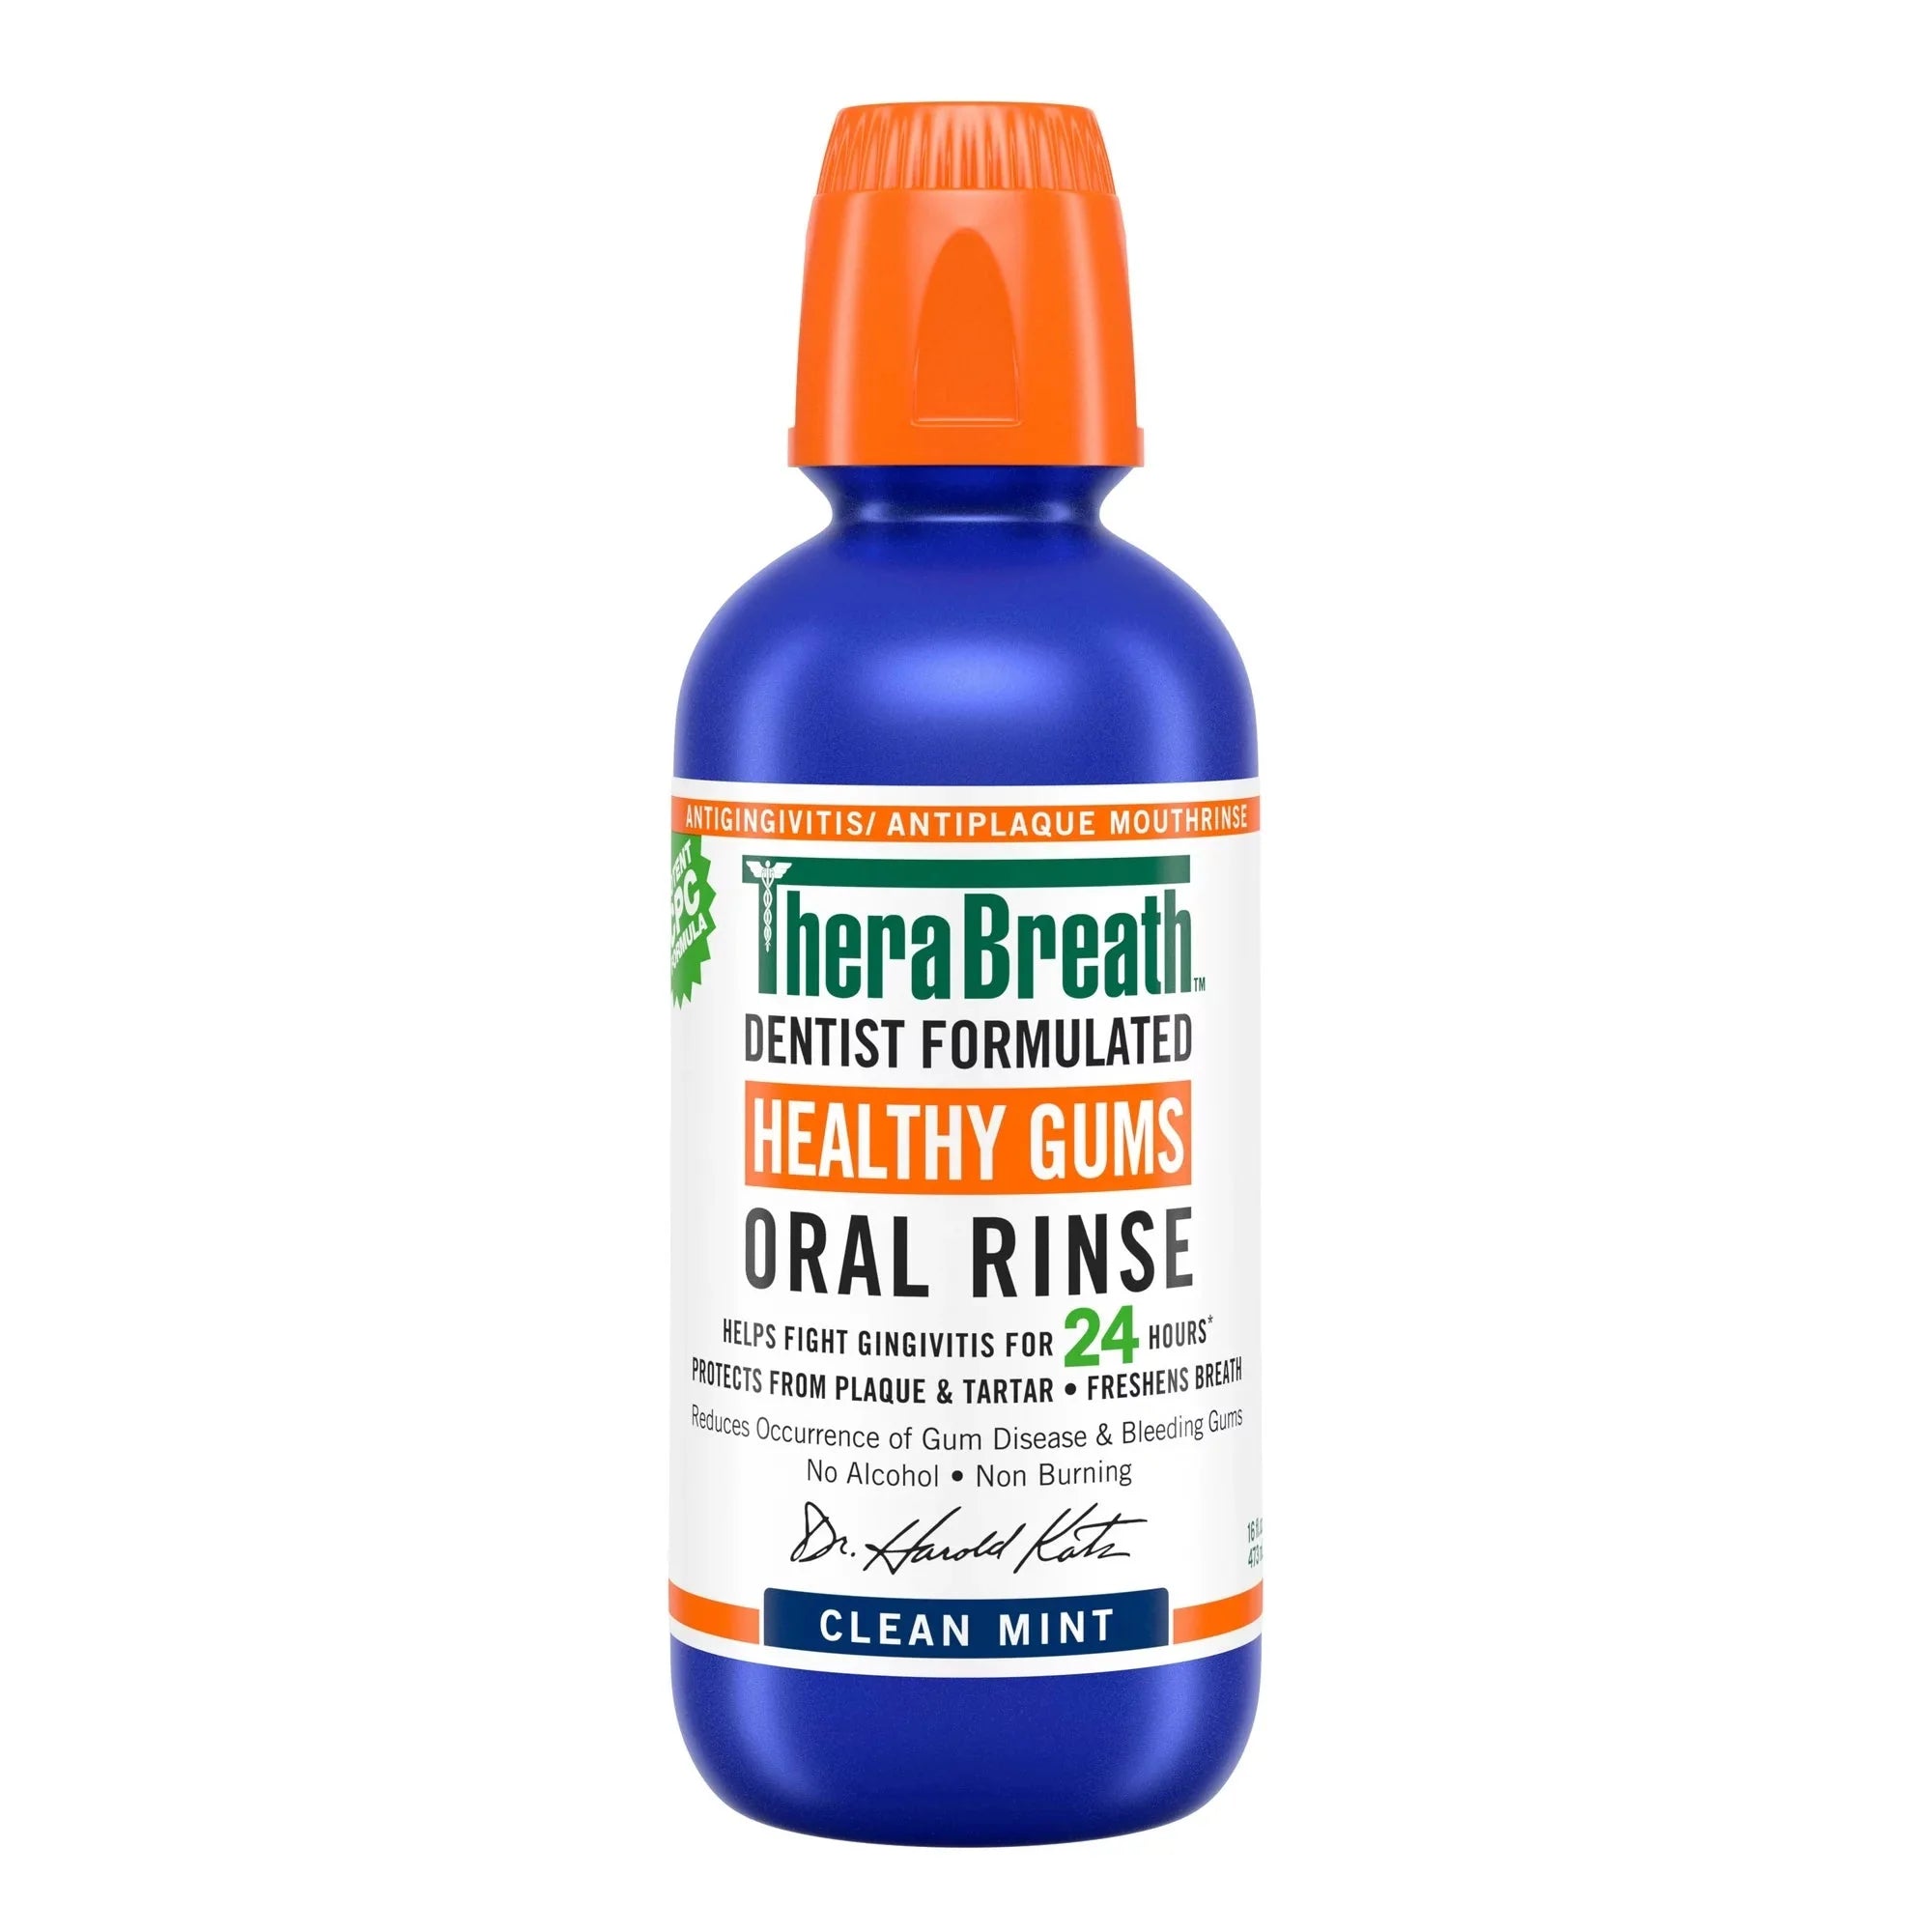 Wholesale prices with free shipping all over United States TheraBreath Healthy Gums Mouthwash, Clean Mint, Antigingivitis, 16 fl oz - Steven Deals